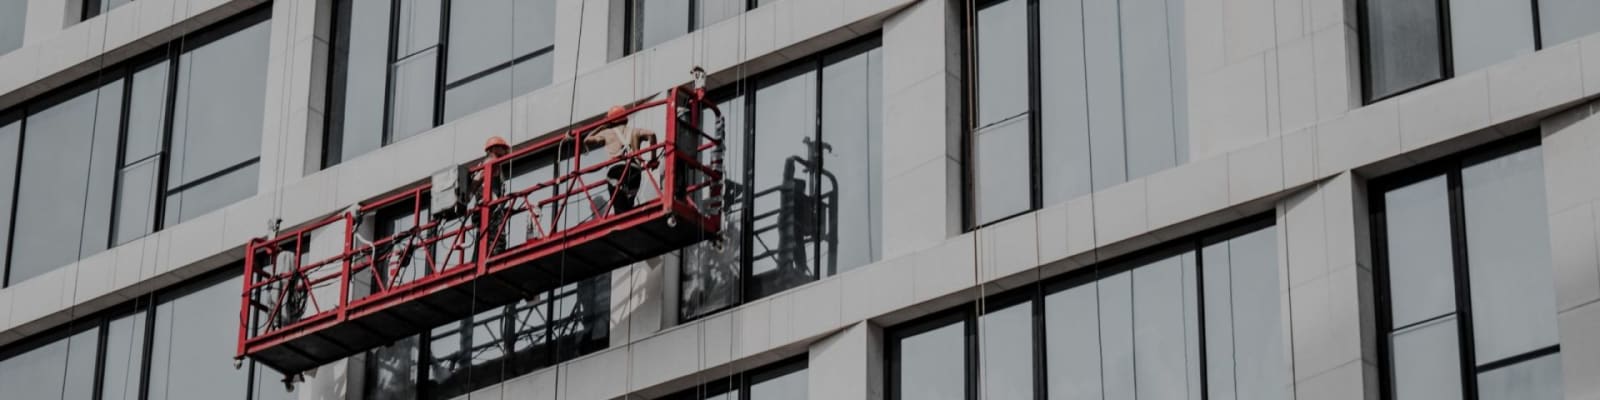 window cleaning services pros in Umhlanga